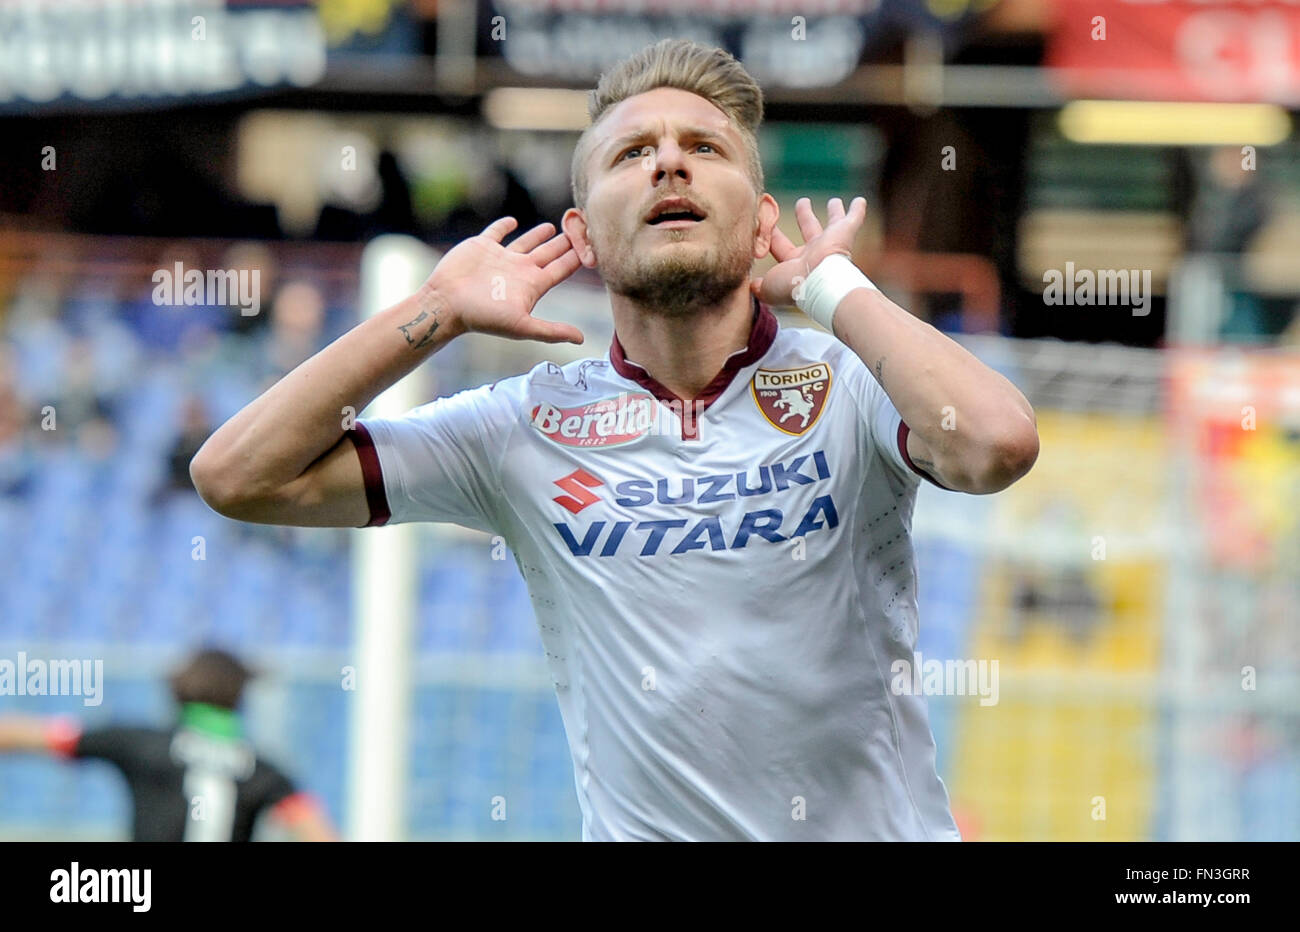 Genoa, Italy. 13th March, 2016: Ciro Immobile celebrates after scoring during the Serie A football match between Genoa CFC and Torino FC at Luigi Ferraris stadium in Genoa, Italy. Credit:  Nicolò Campo/Alamy Live News Stock Photo